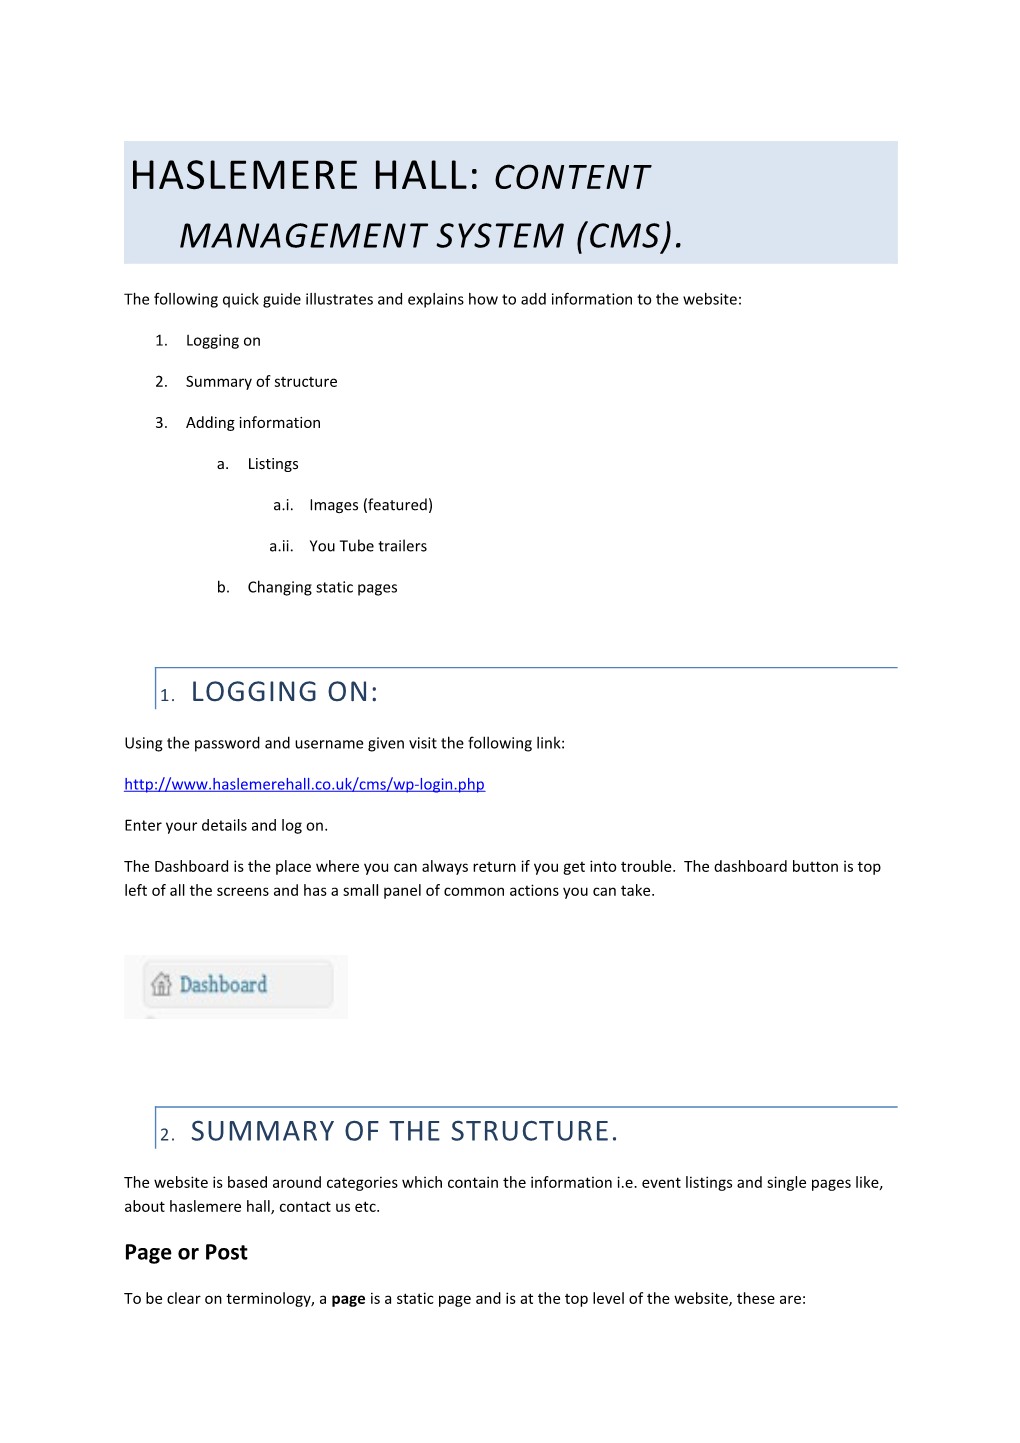 Haslemere Hall: Content Management System (CMS)